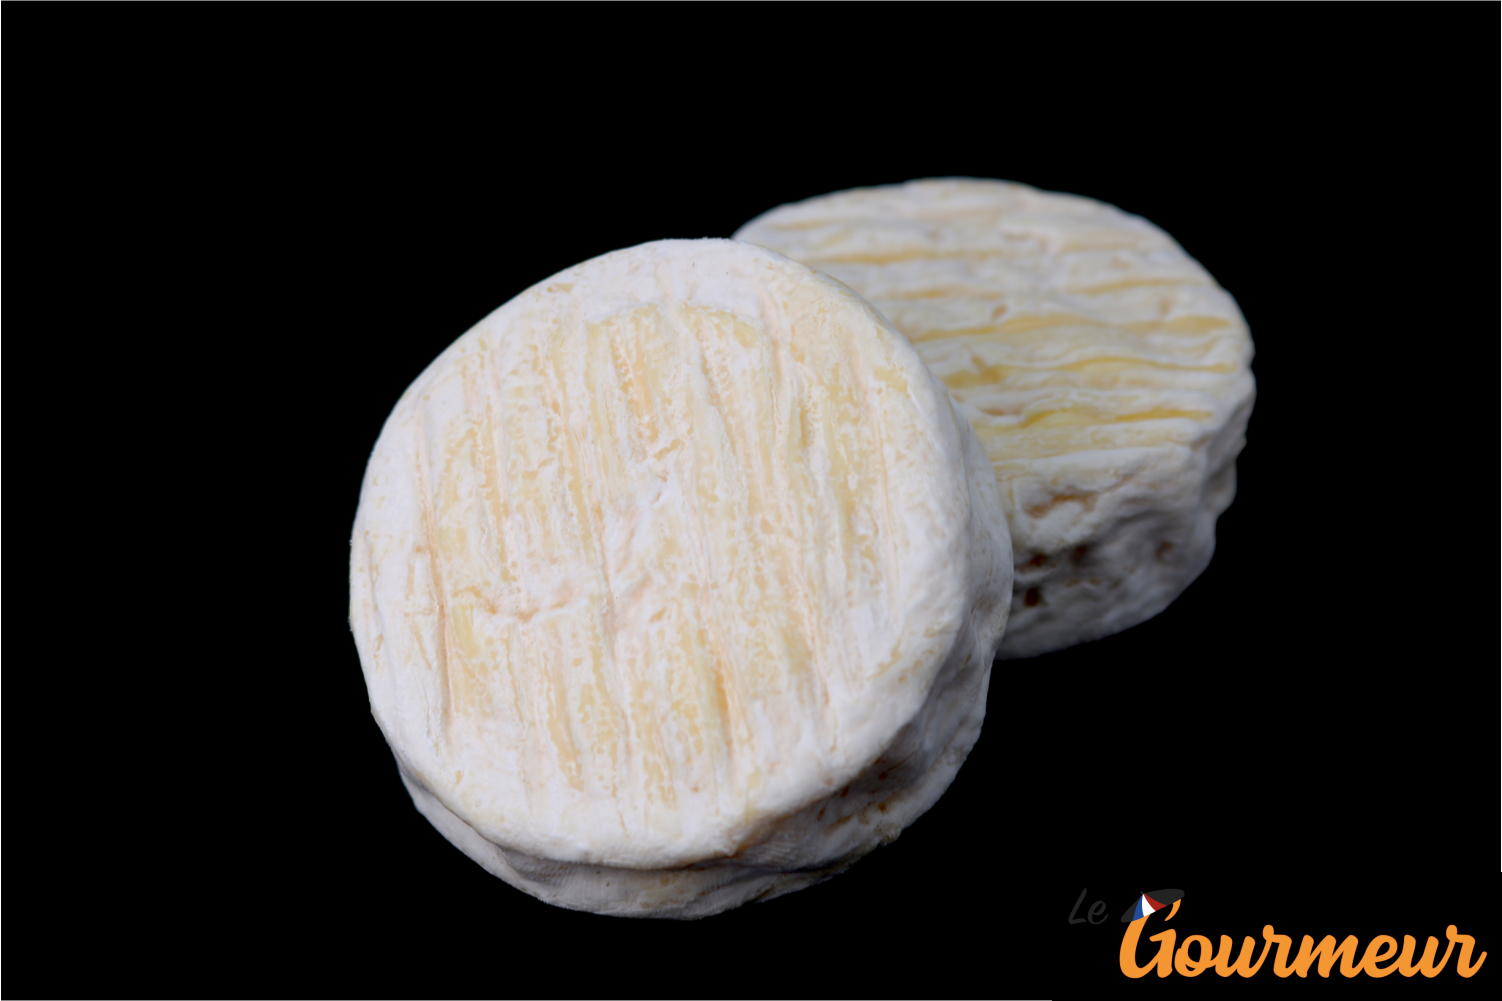 Saint-Marcellin IGP fromage